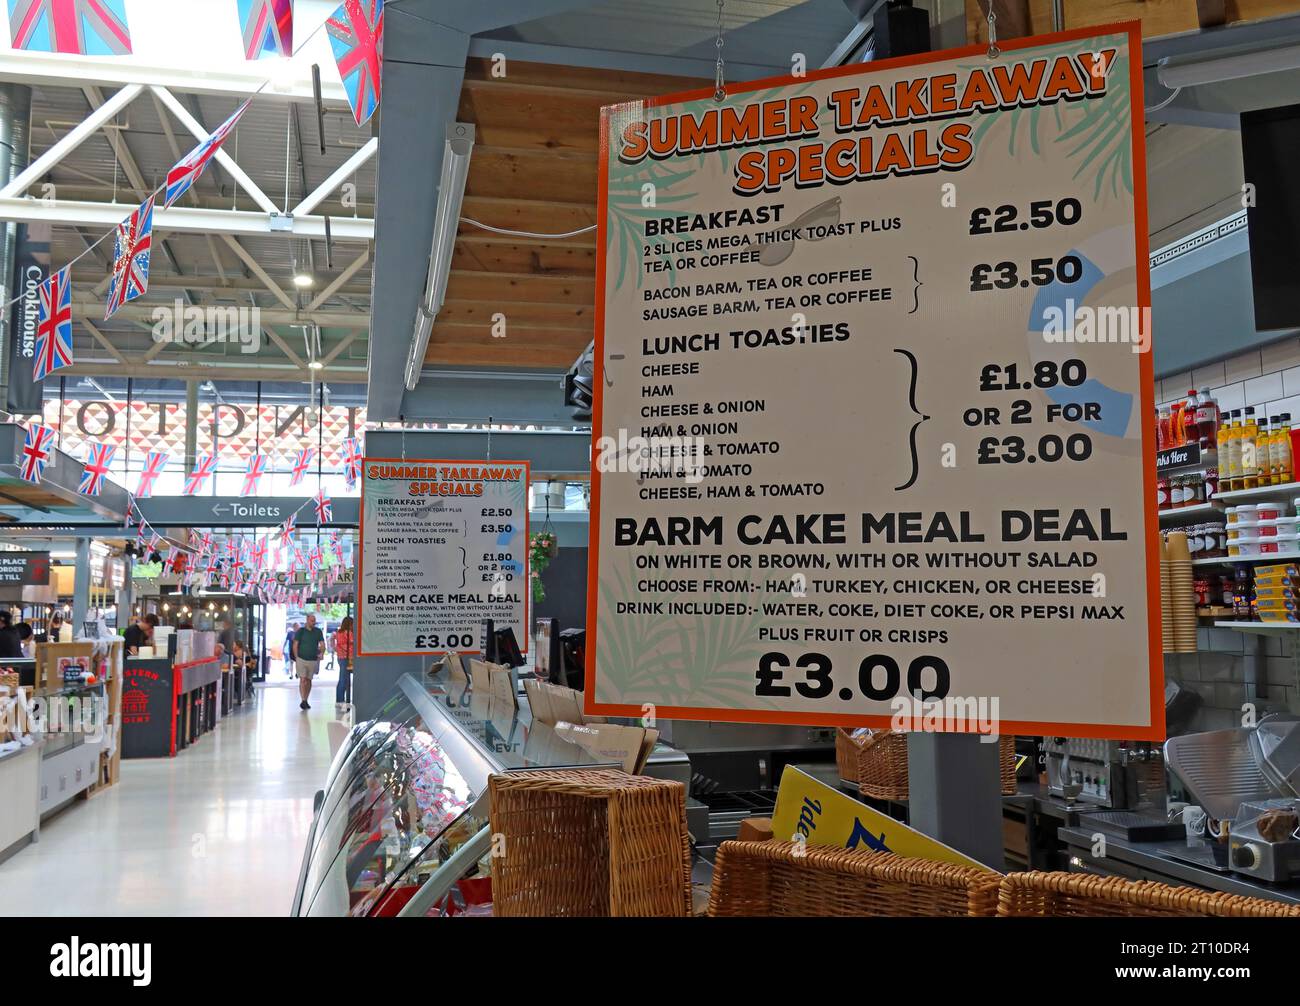 Summer Takeaway Specials - Barm Cake Meal Deal - Breakfast , Lunch Toasties at Time Square, Warrington Market, Cheshire, WA1 2HN Stock Photo